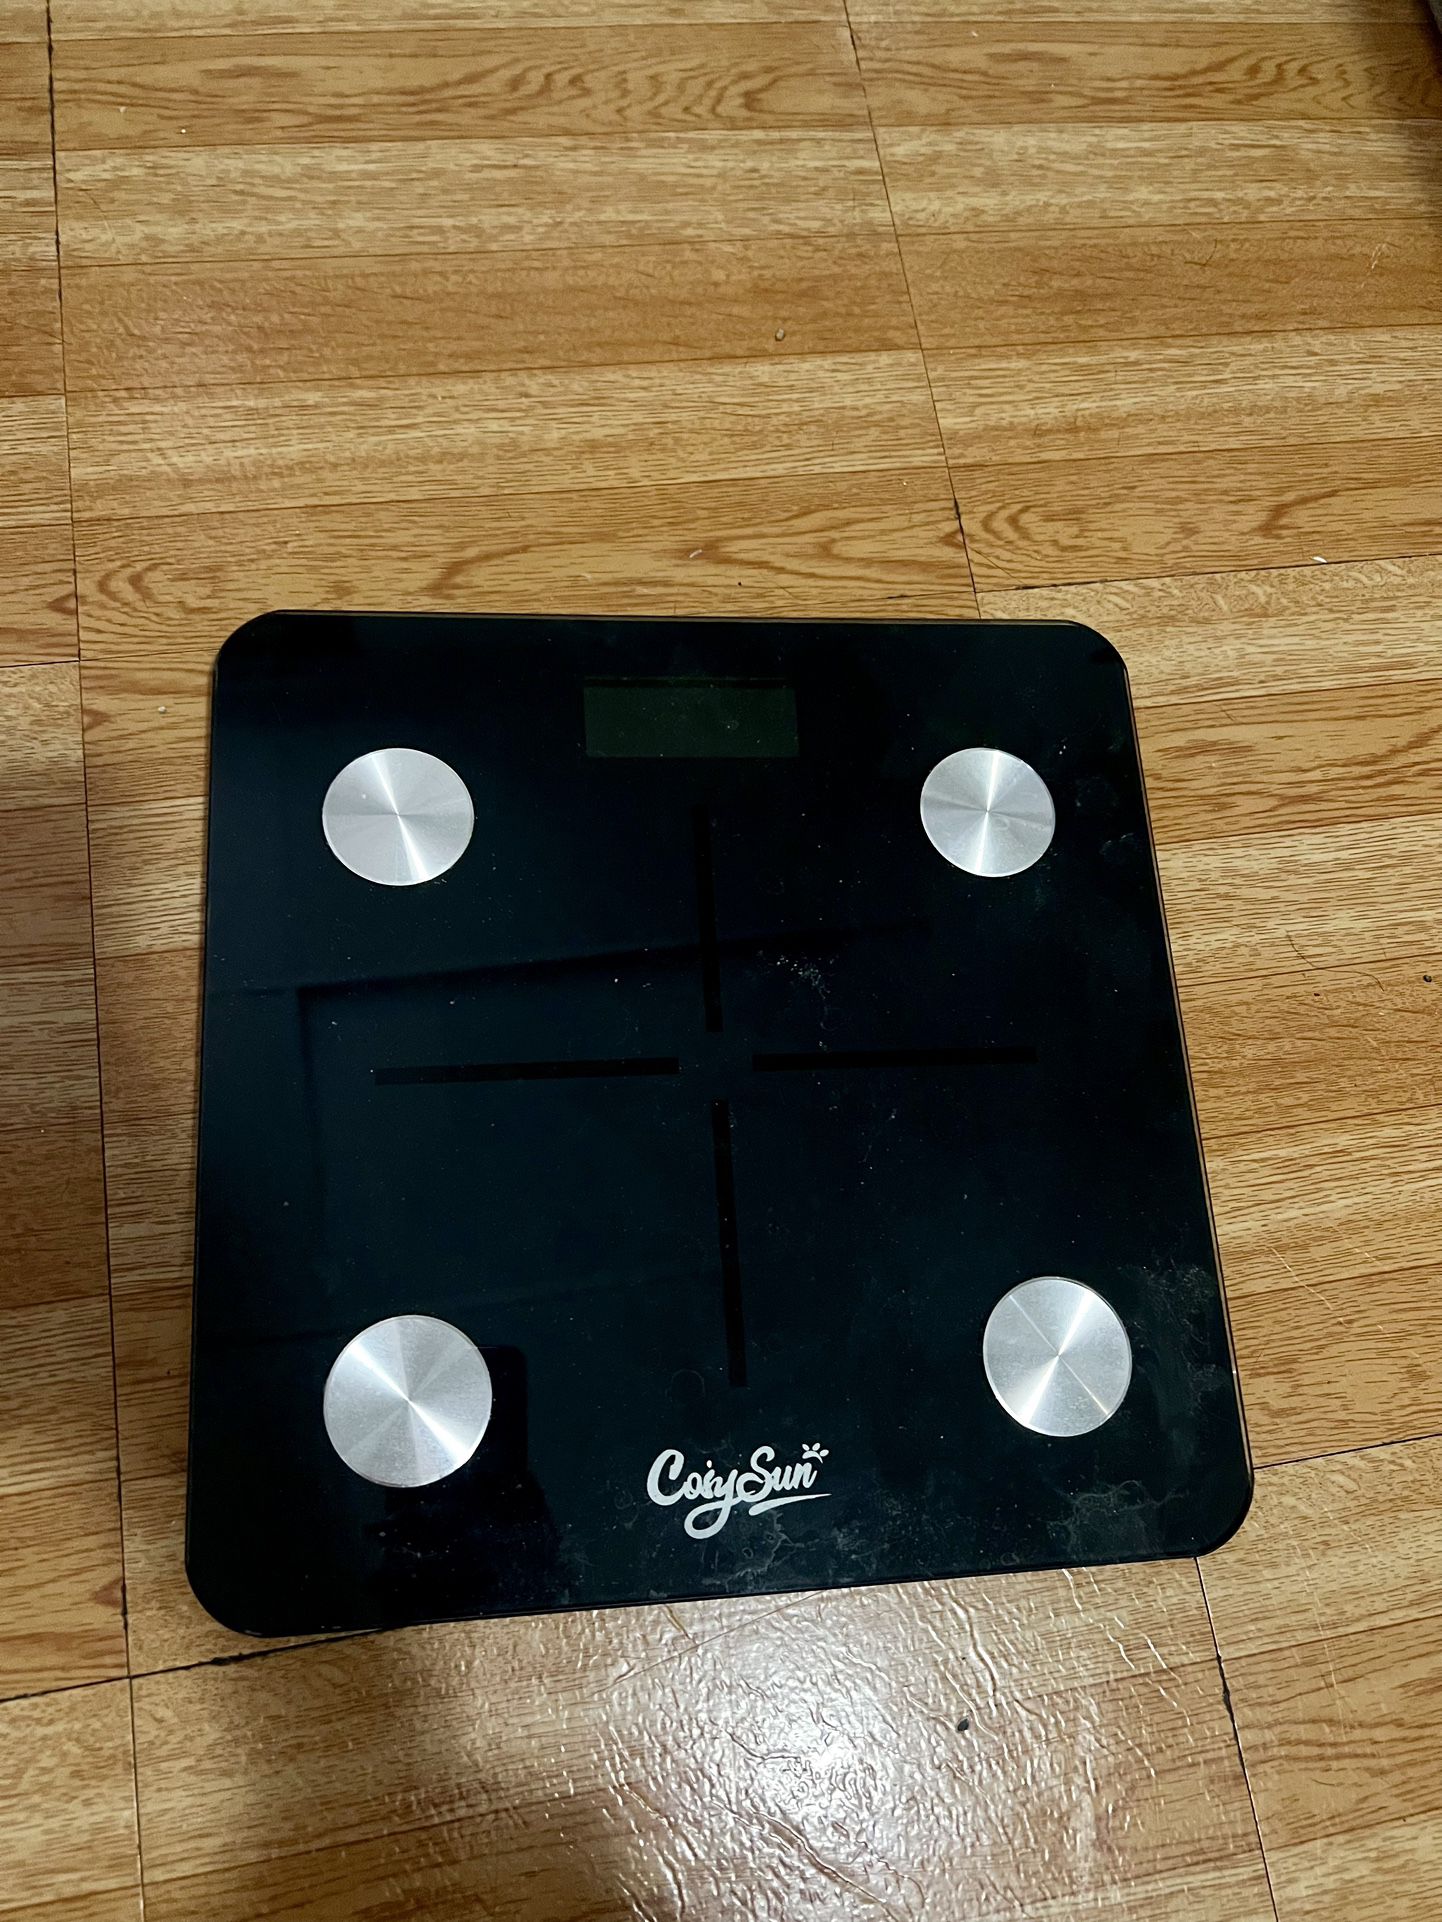 Smart weighing scale